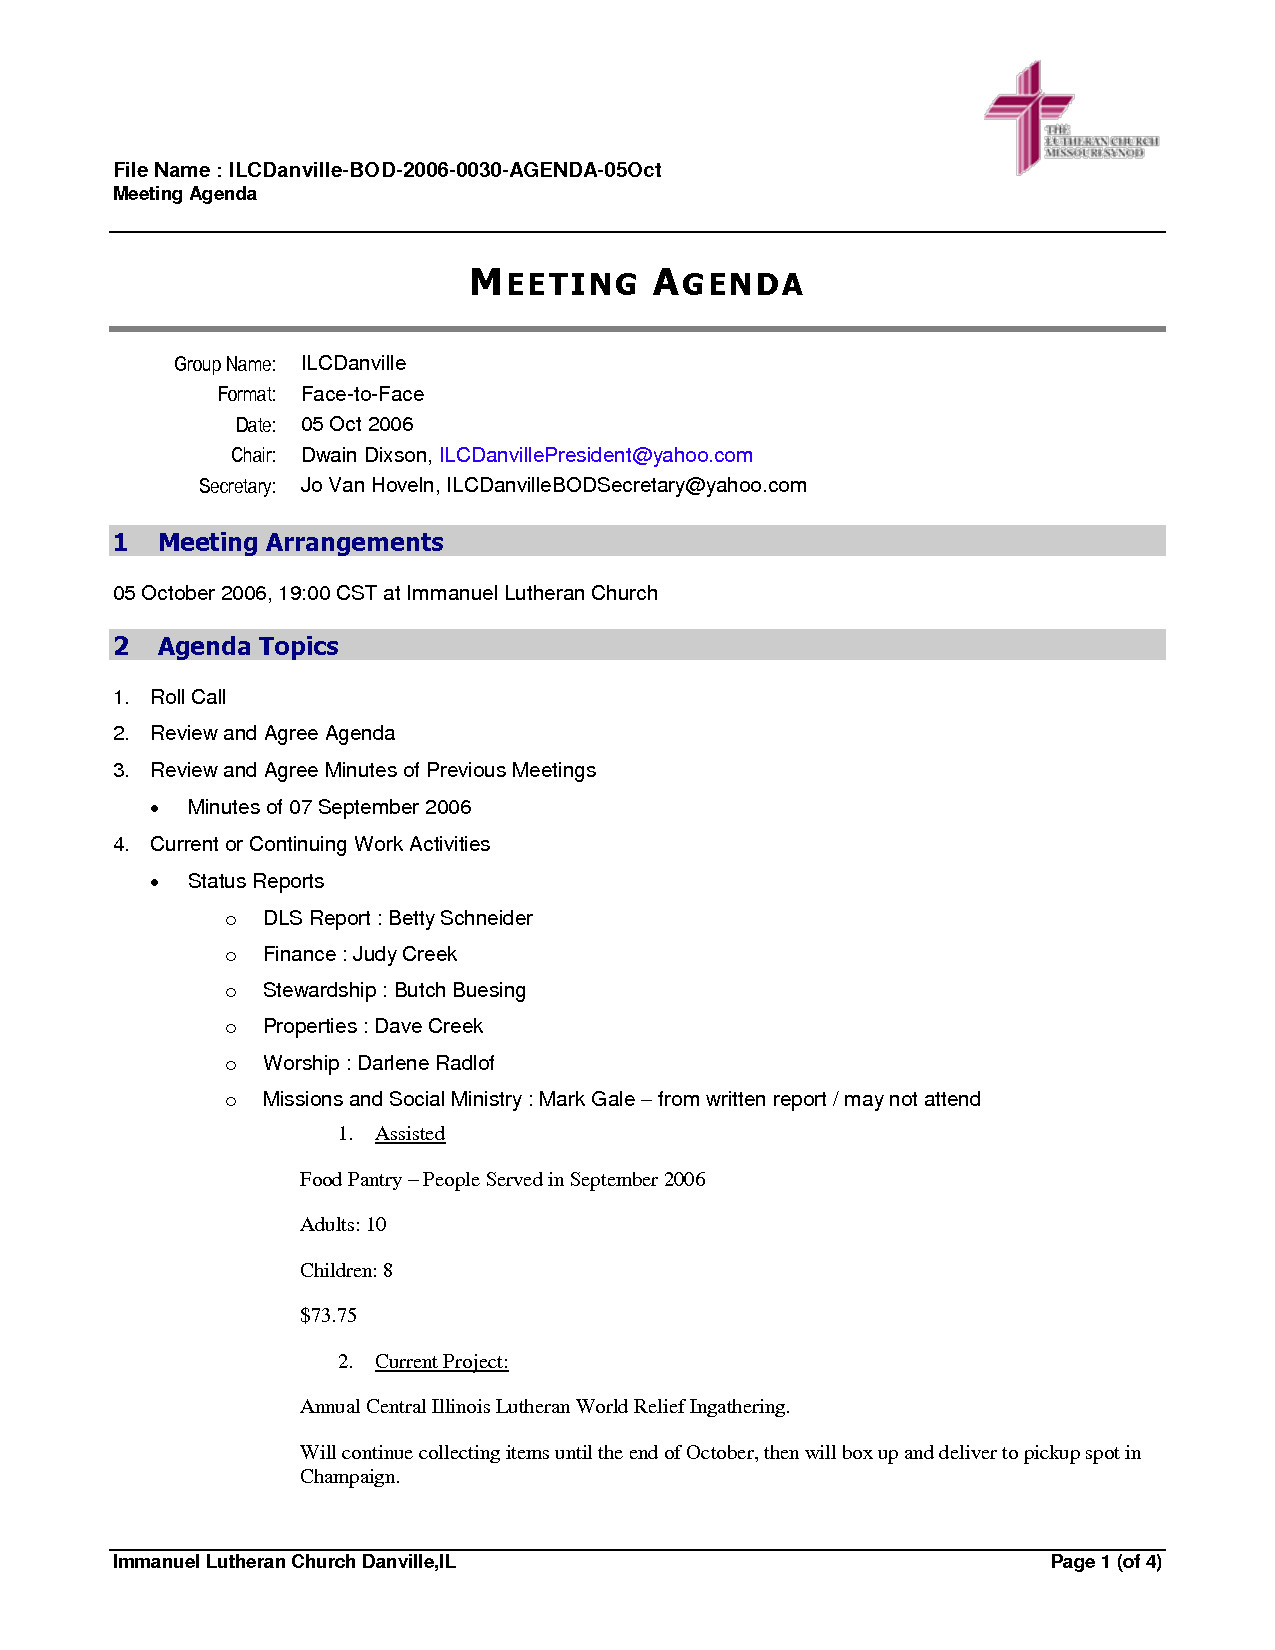 Ministry meeting agenda template